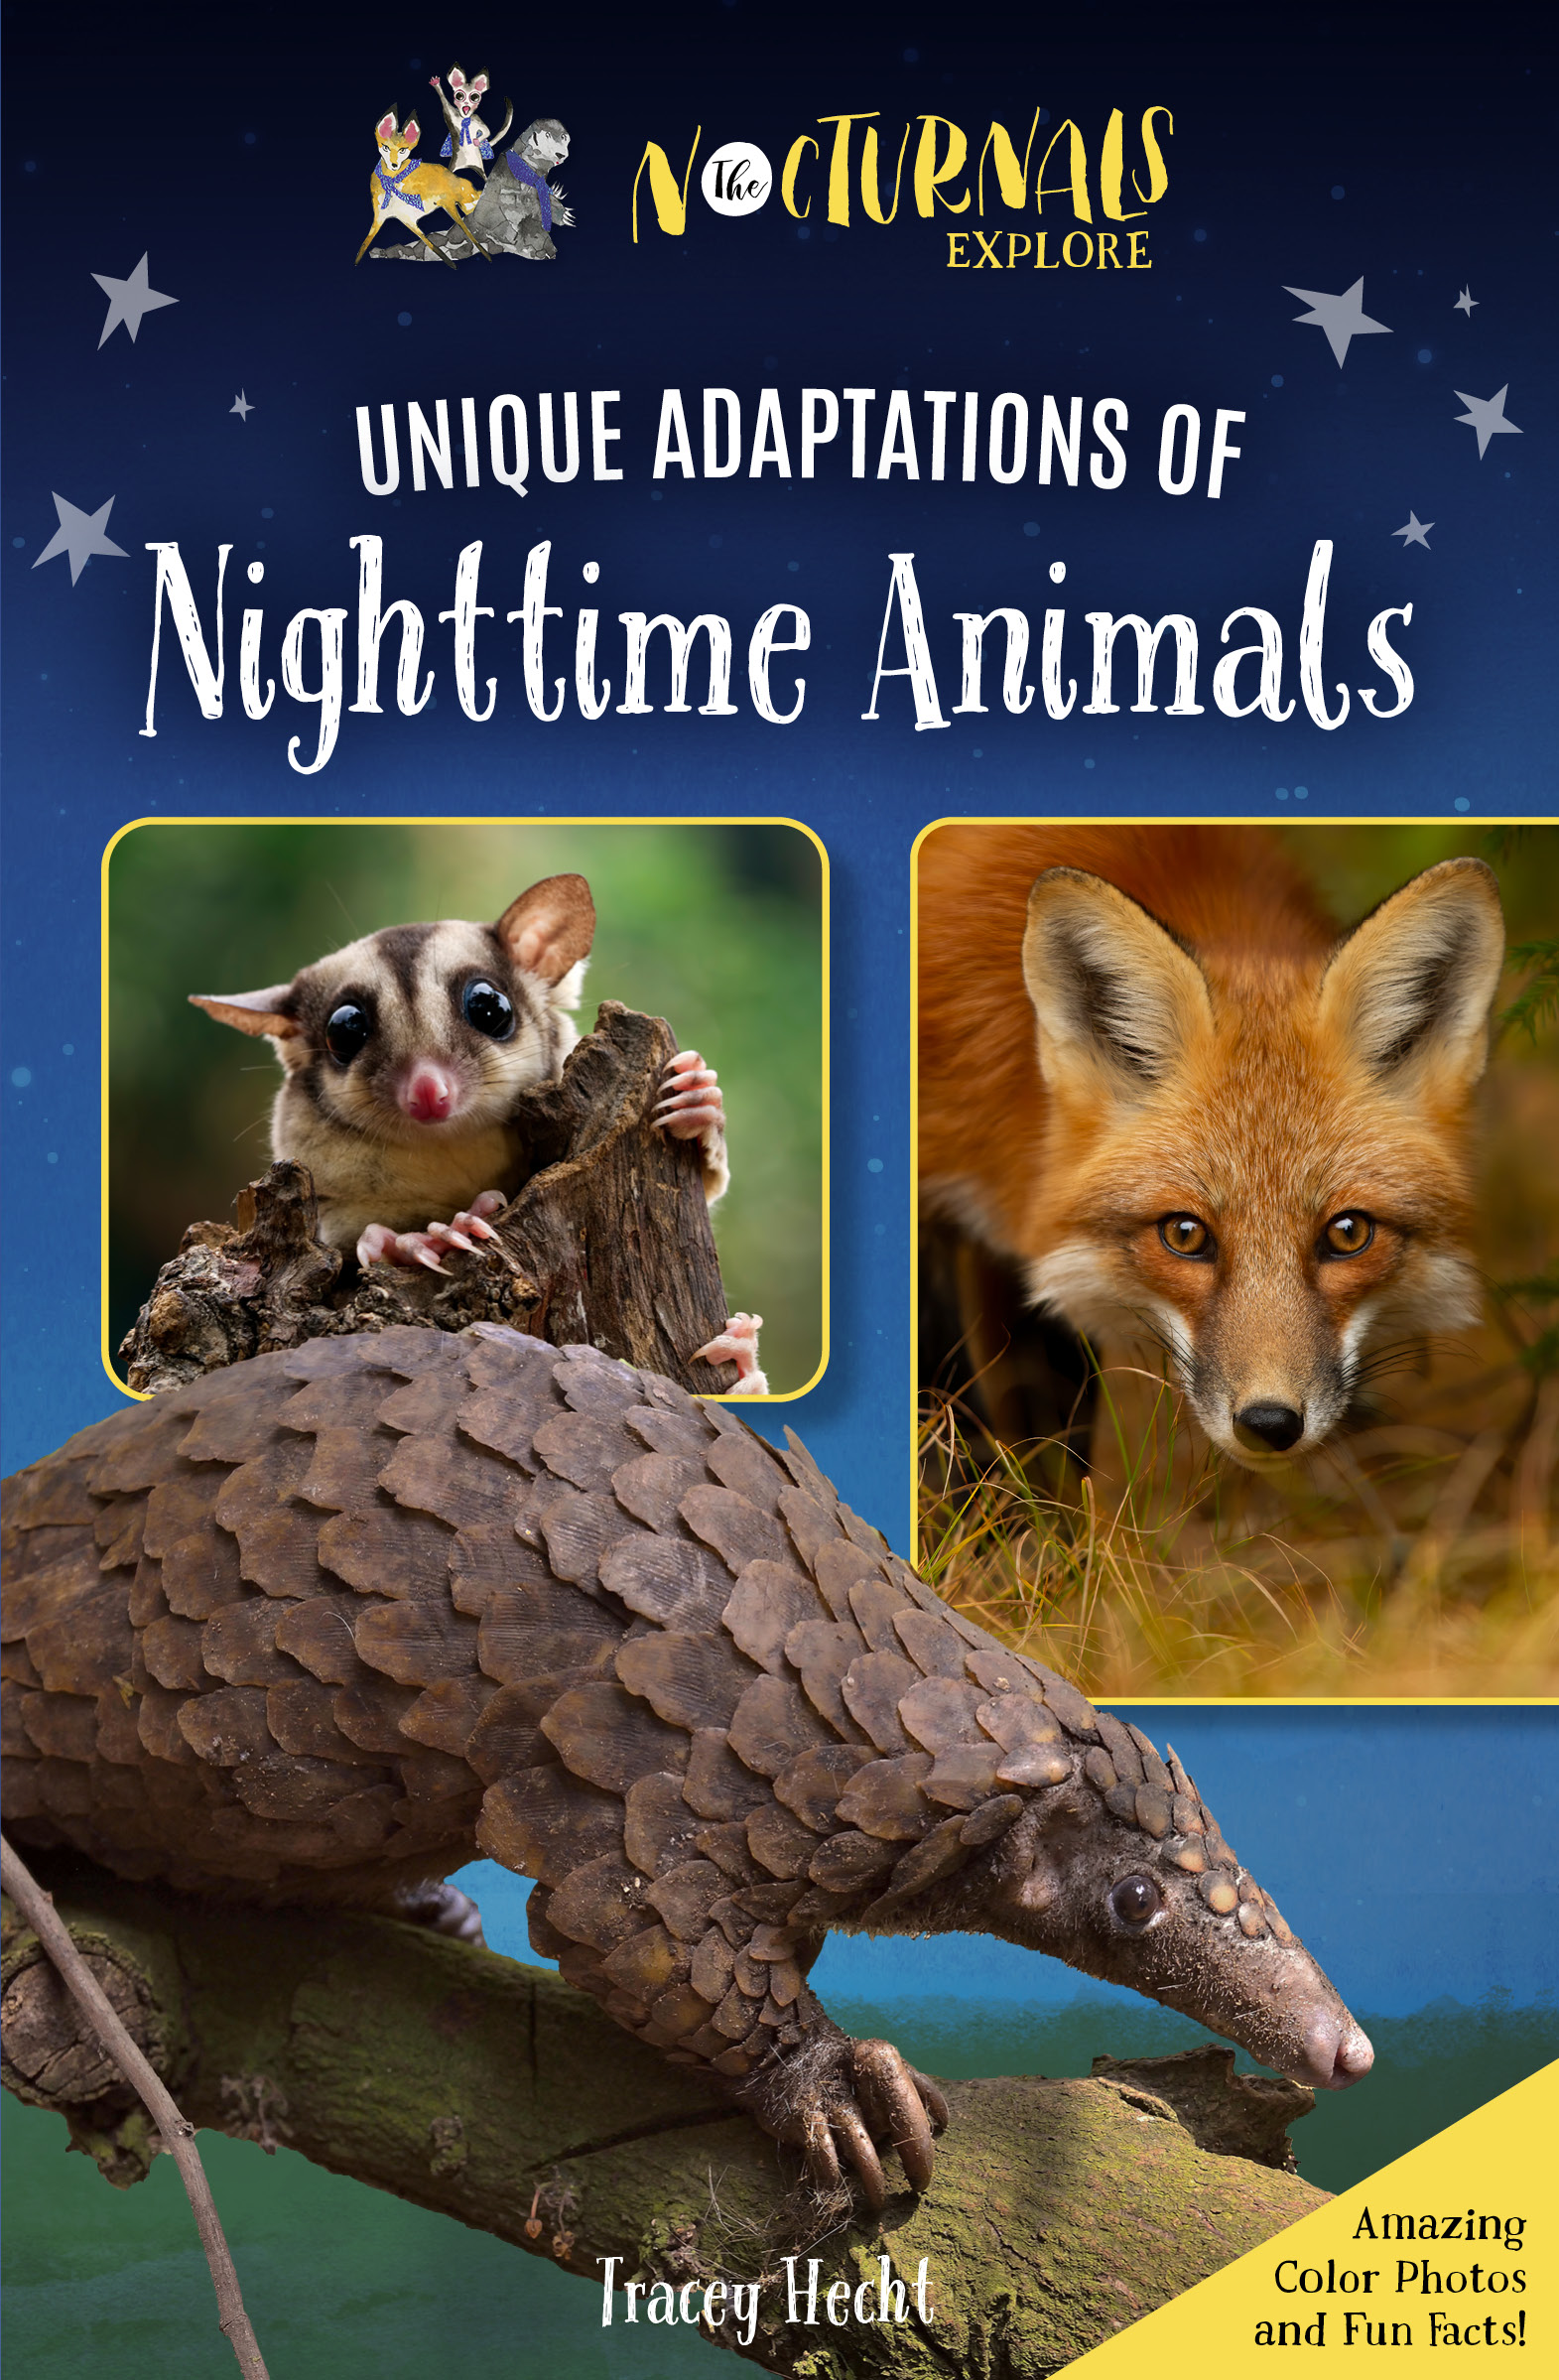 The nonfiction chapter book companion to The Mysterious Abductions has a dark blue cover with a real picture of a pangolin climbing a tree branch on the front. Behind the pangolin on the left is a picture of a real sugar glider and on the right is a real picture of a fox. 